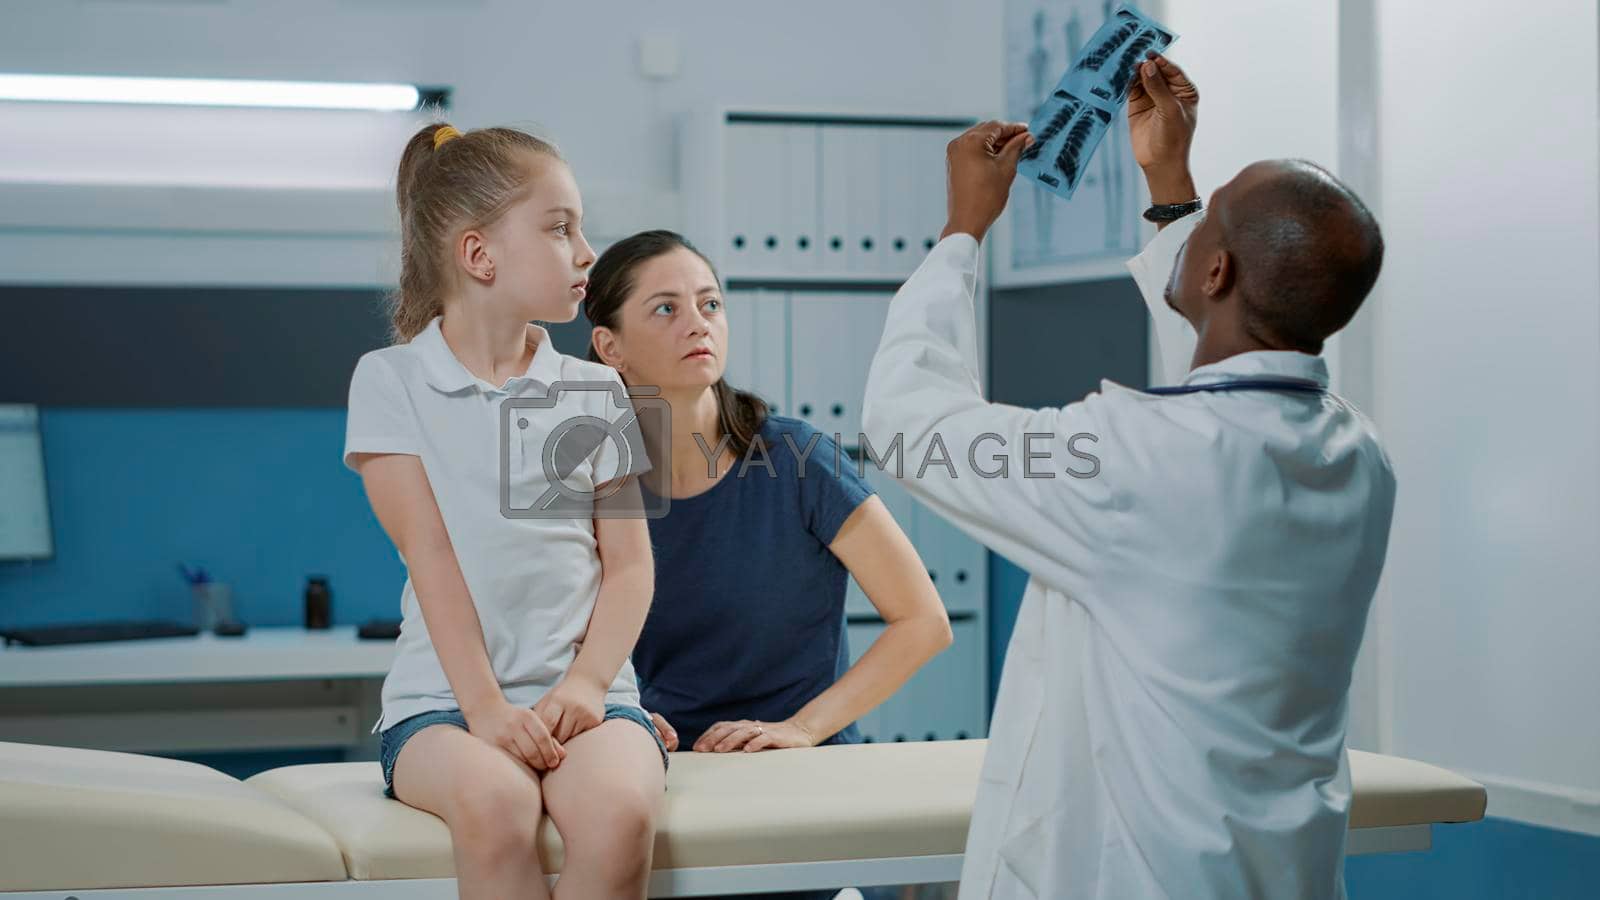 Pediatrician showing radiography results to mother and child at medical appointment. Physician explaining x ray scan diagnosis to small patient and adult in cabinet at checkup examination.